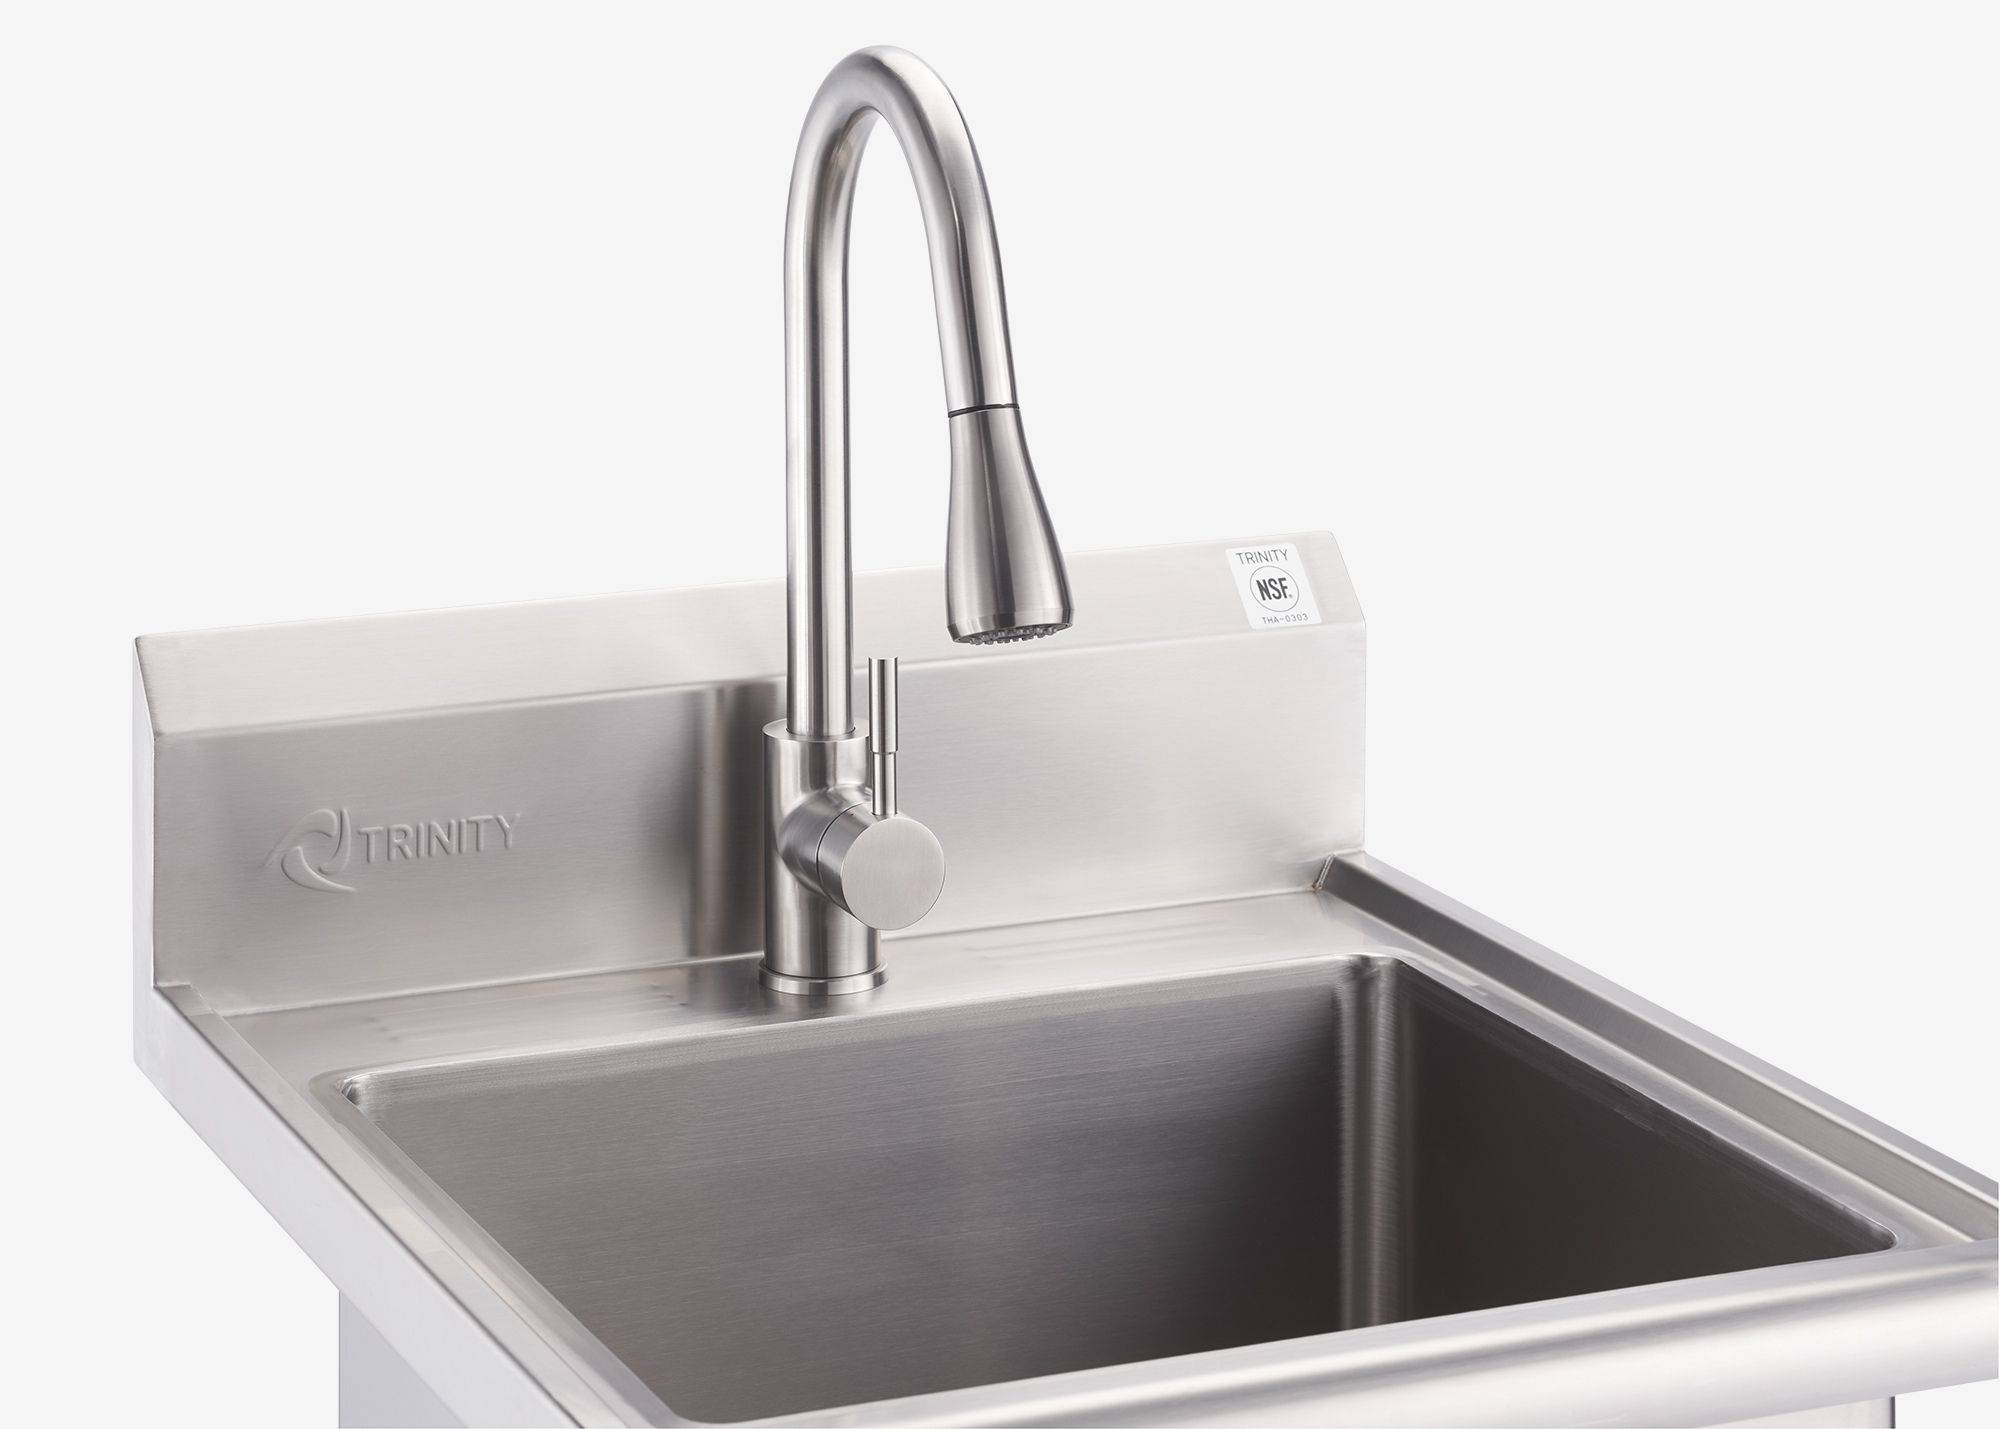 stainless steel trinity sink with pull-out faucet